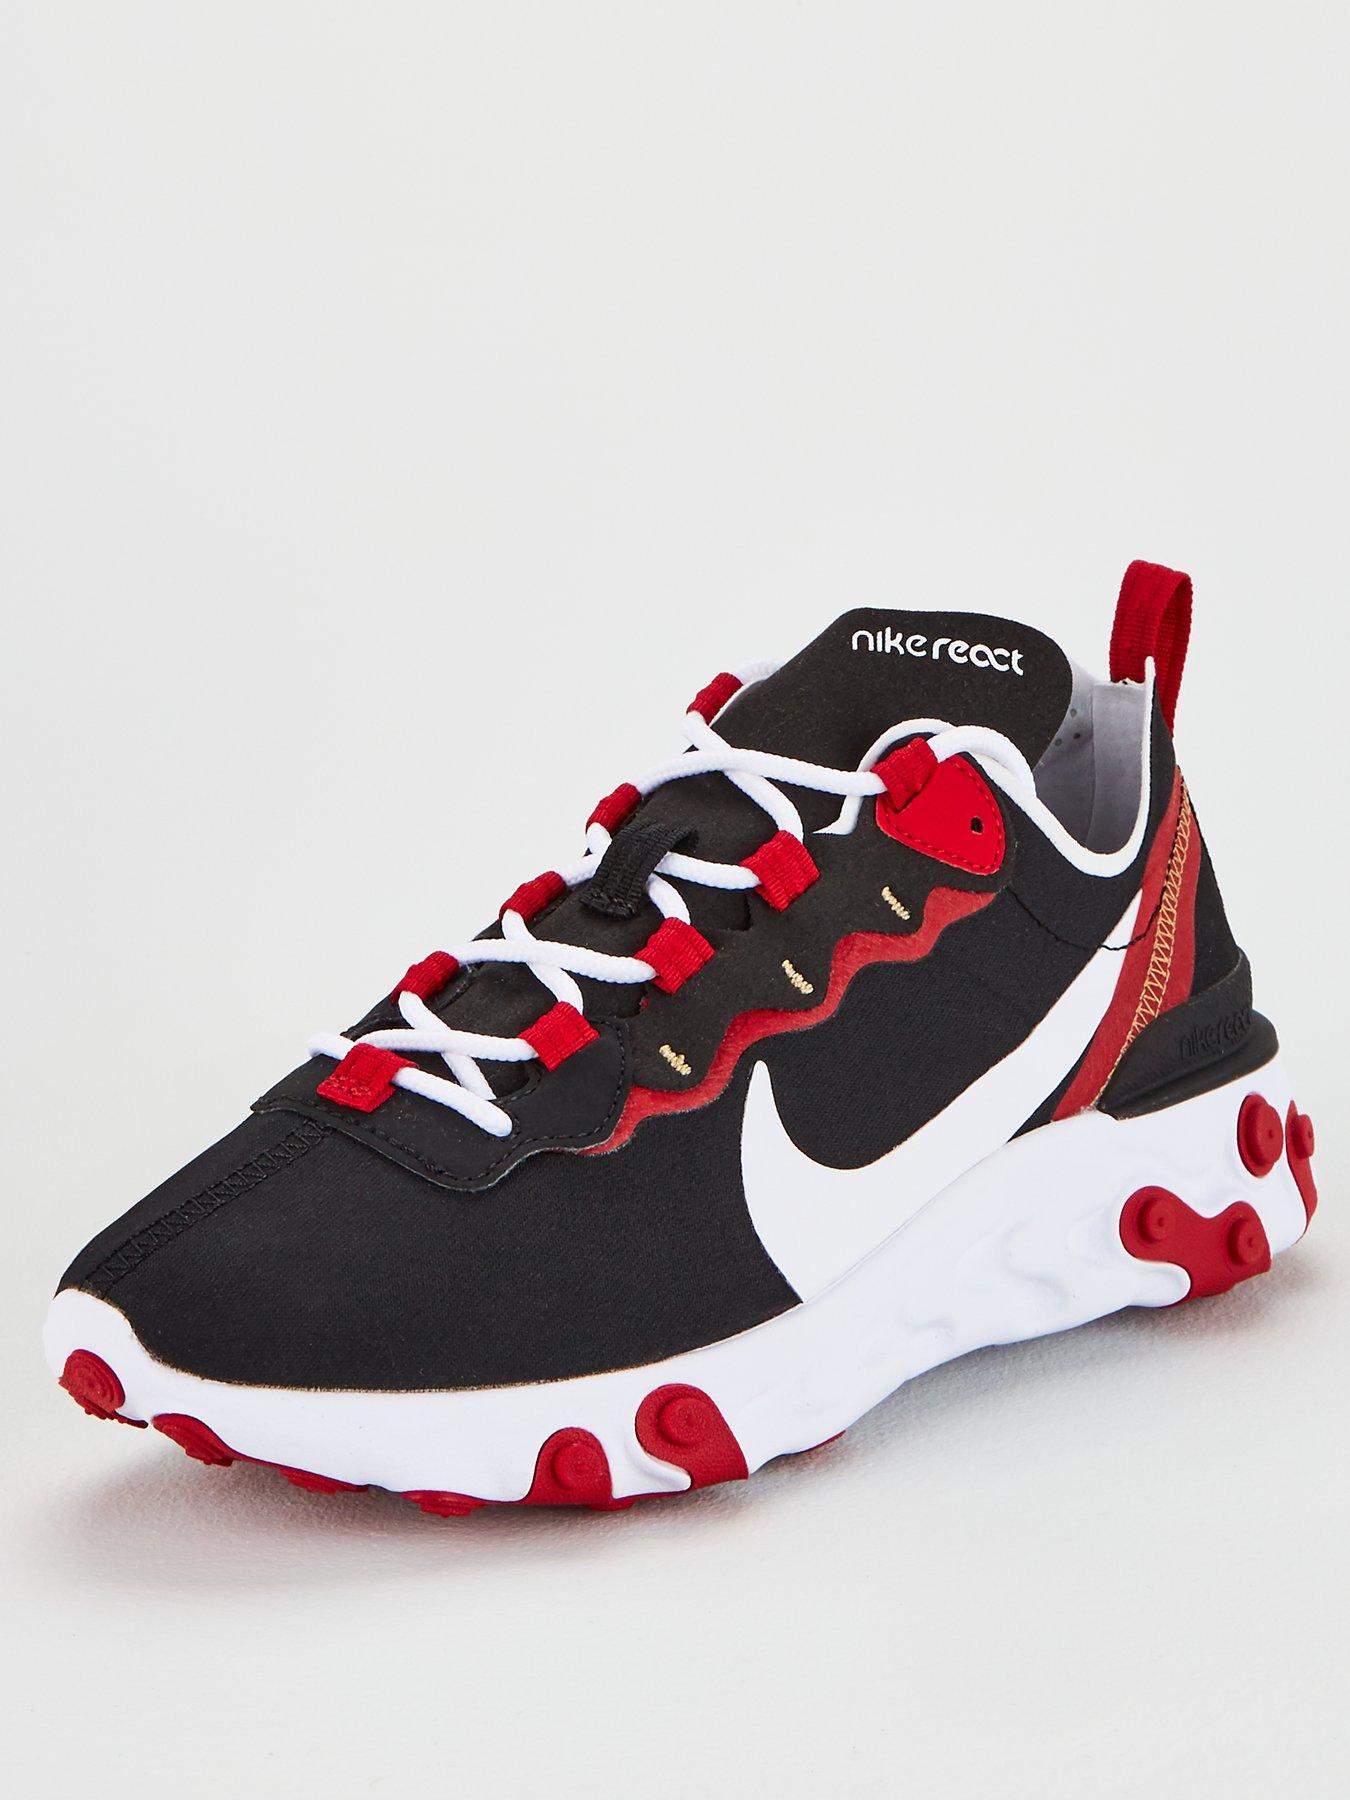 black and red nike react element